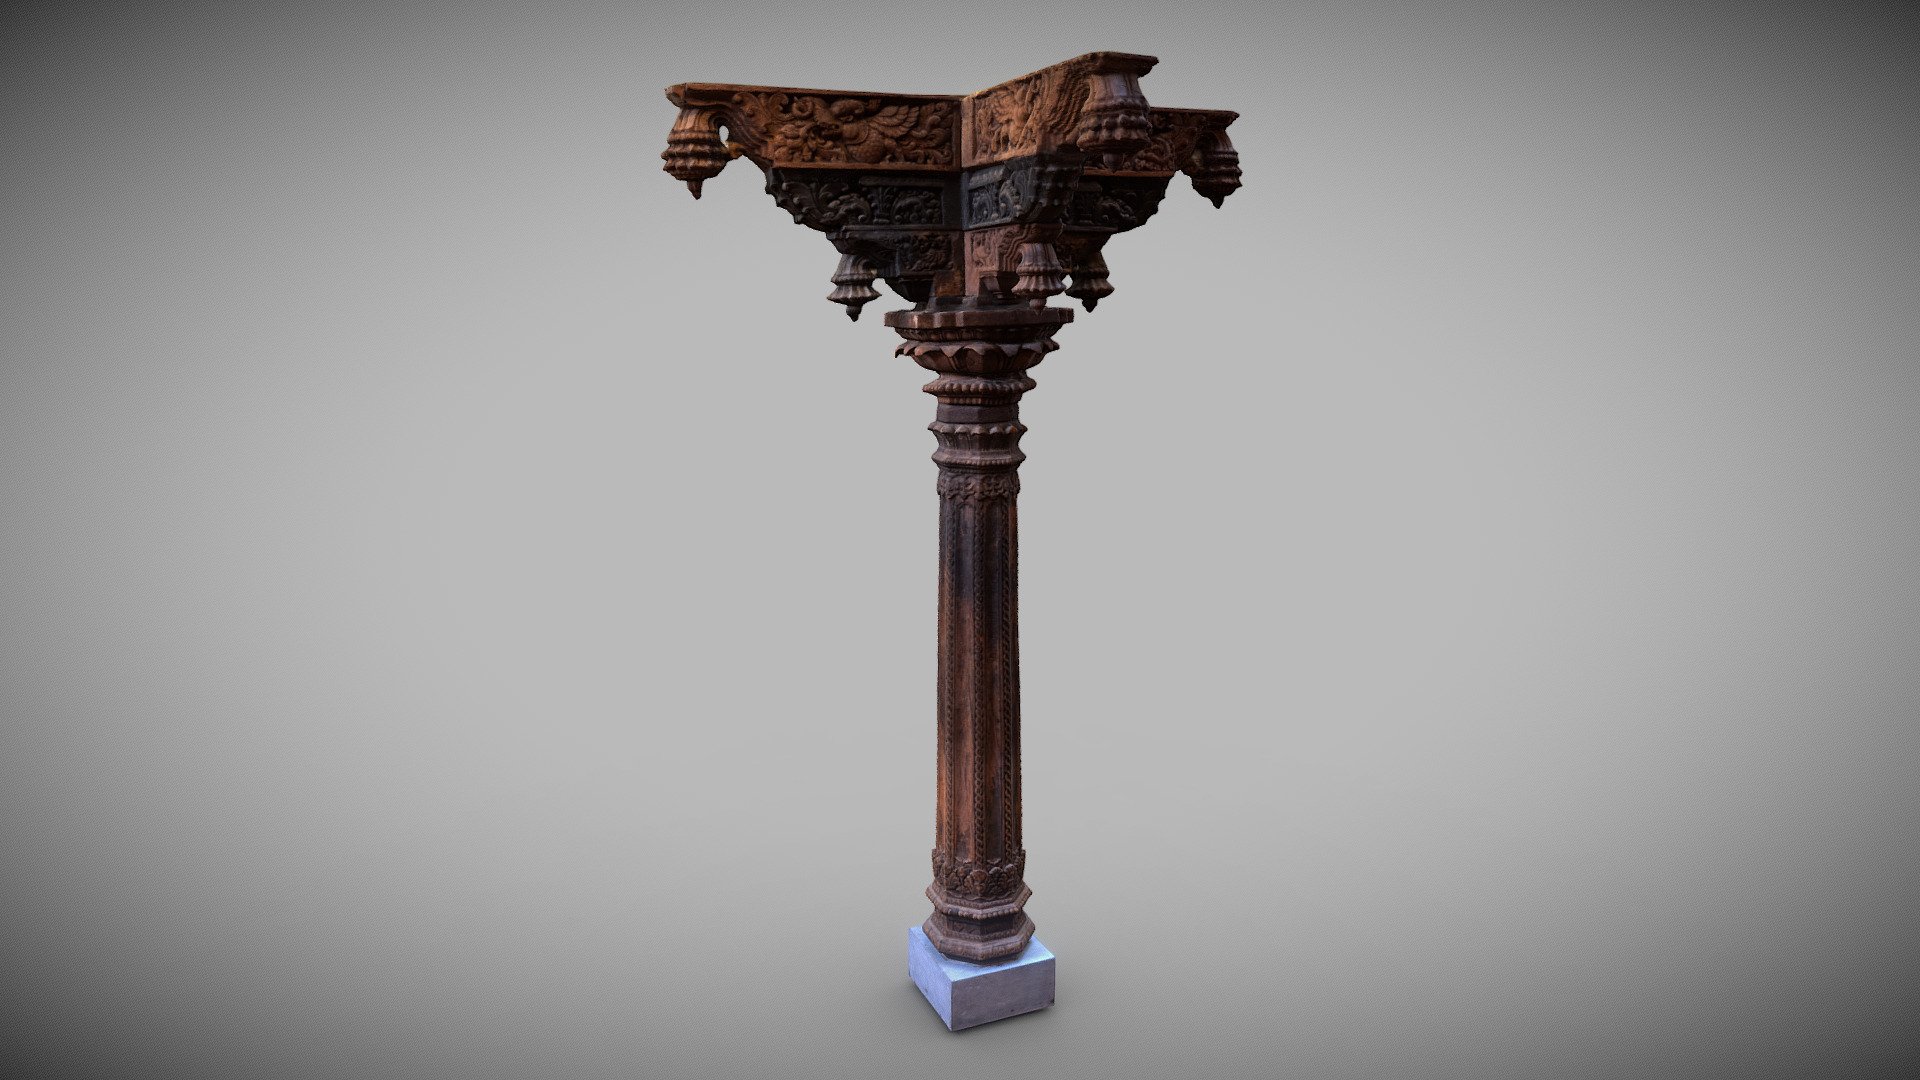 Temple pillars, wood, Kerala, South India, late 18th century. Musée d'Art et d'Histoire (Musée du Cinquantenaire, Brussels). Made with CapturingReality.

For more updates, please consider to follow me on Twitter at @GeoffreyMarchal 3d model